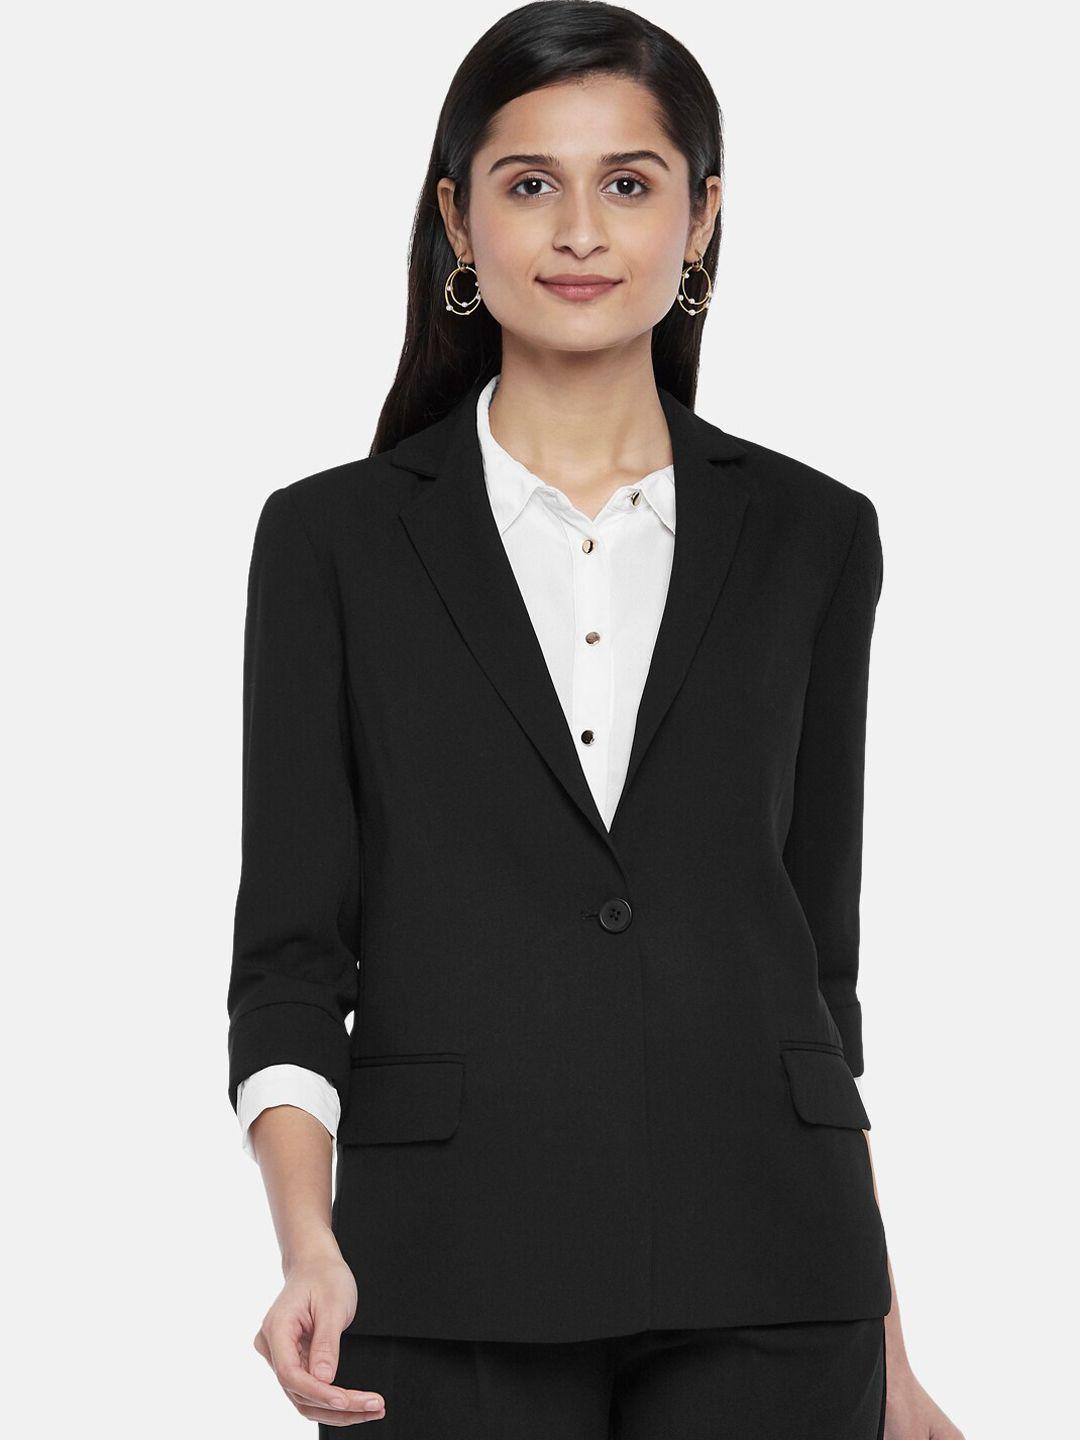 annabelle by pantaloons women black solid single breasted blazer